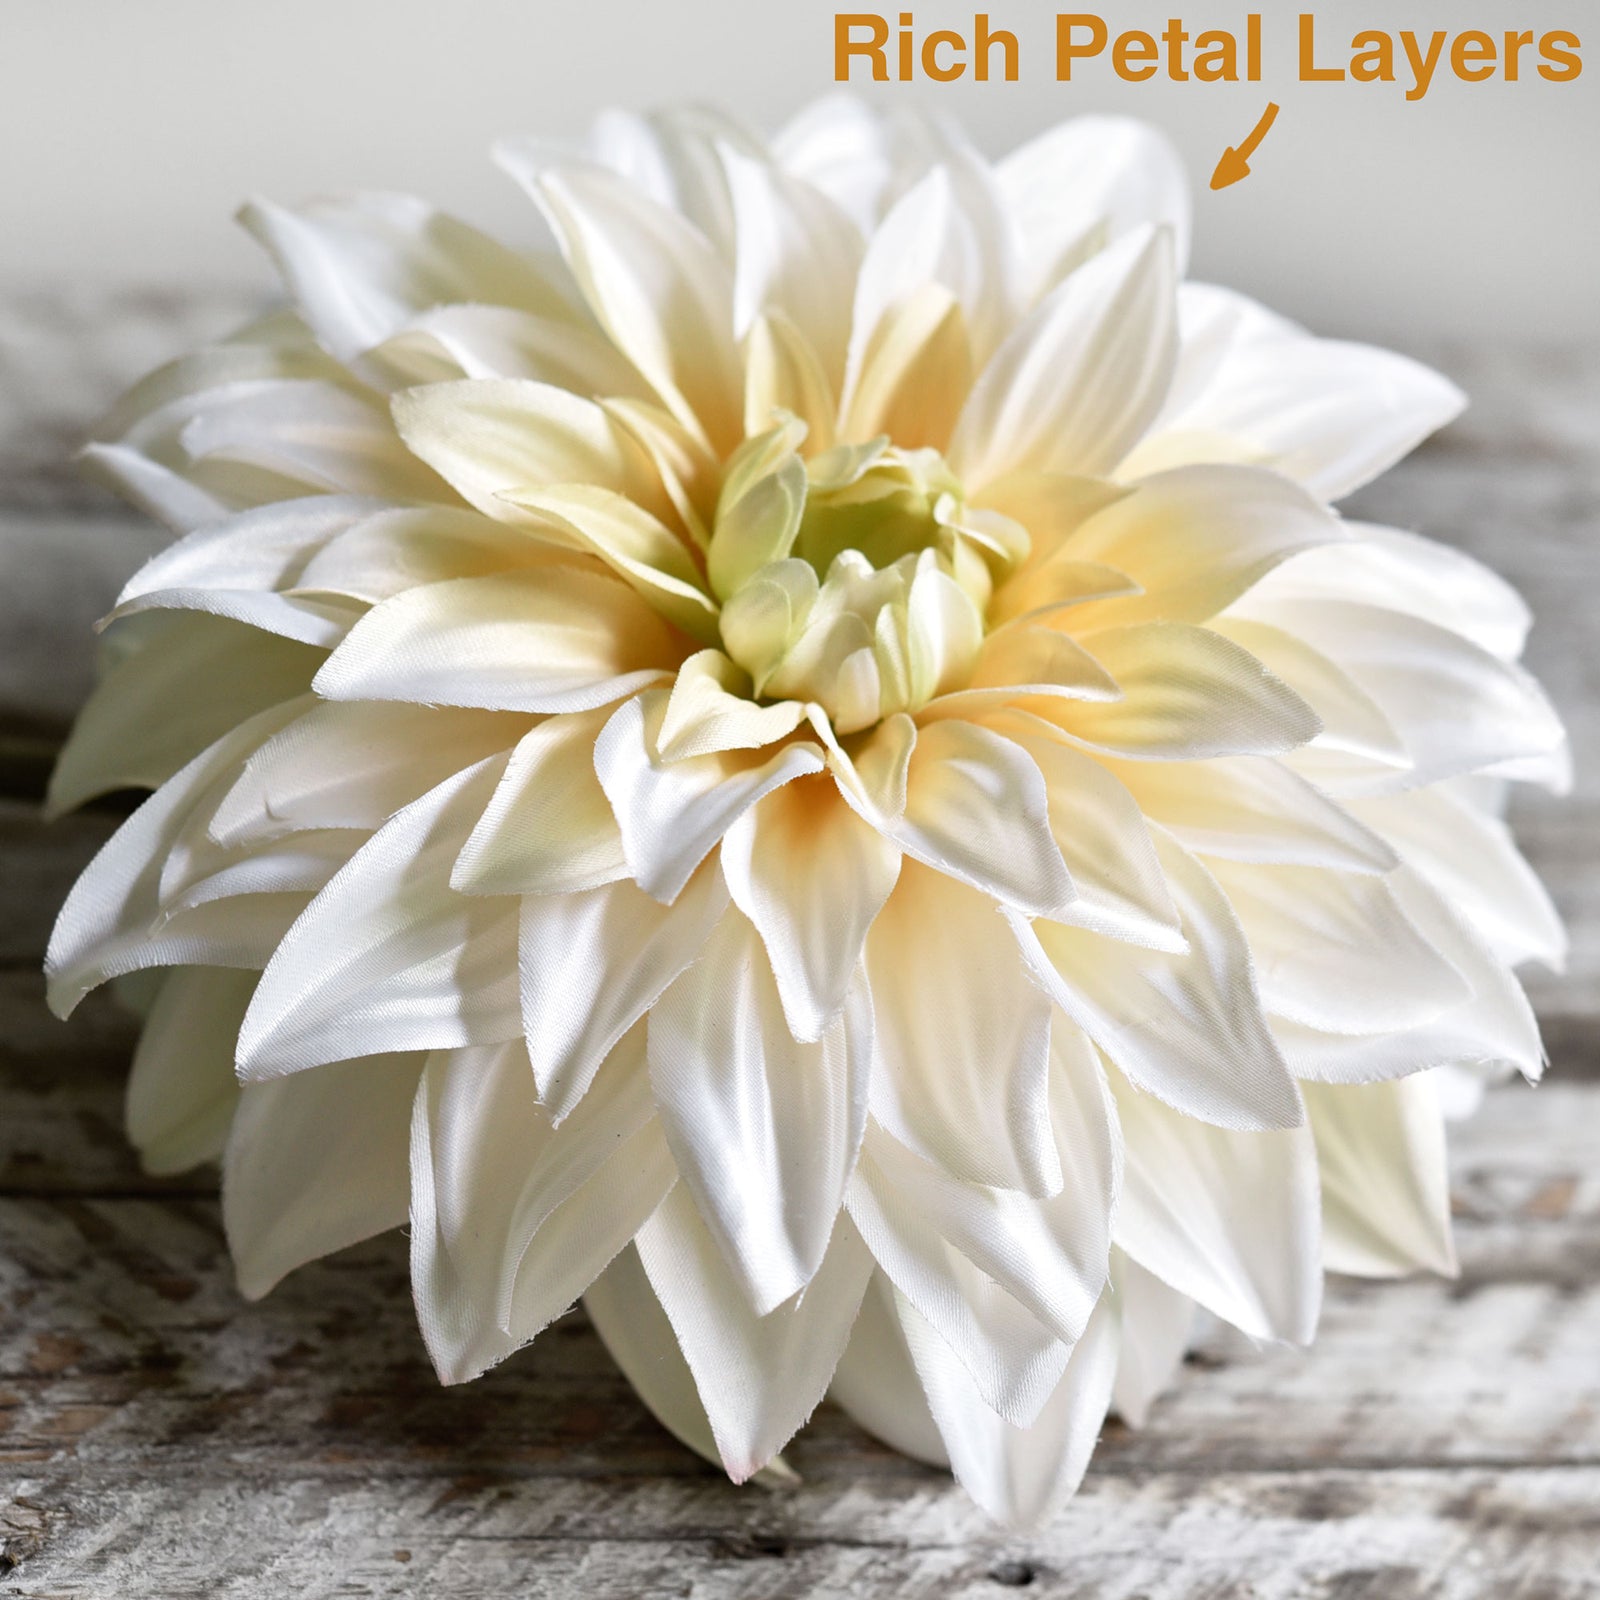 FiveSeasonStuff Artificial Flowers Dahlia Silk Flowers for Outdoors Indoors and Tall Vases (Classic White)